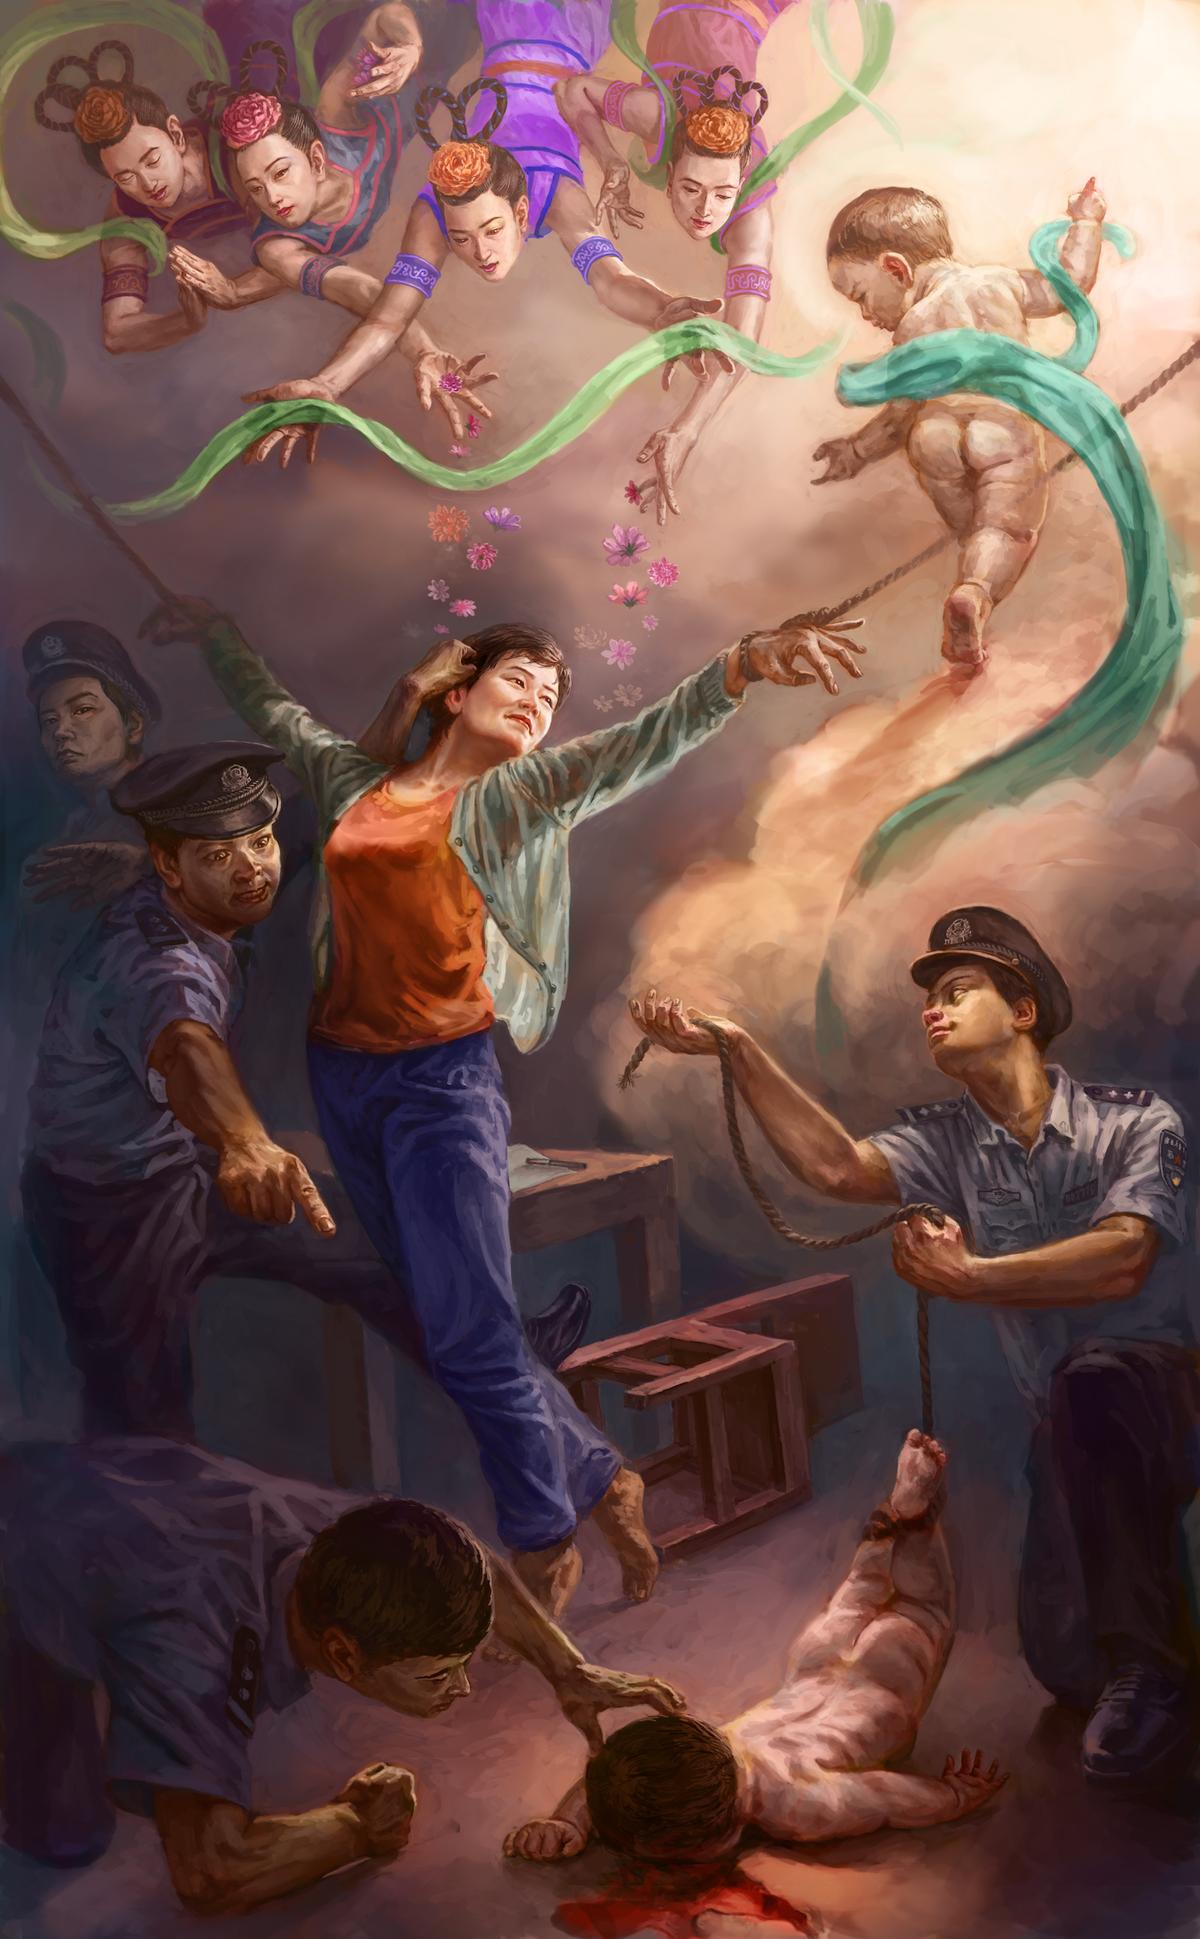 "See You Up There, Mom": Based on a real-life incident, the painting shows a mom being tortured for her faith in Falun Gong while the soul of her months-old baby son, who has been killed by the Chinese prison guards, is seen flying above and encouraging her to stay strong. (Courtesy of Loc Minh Duong)